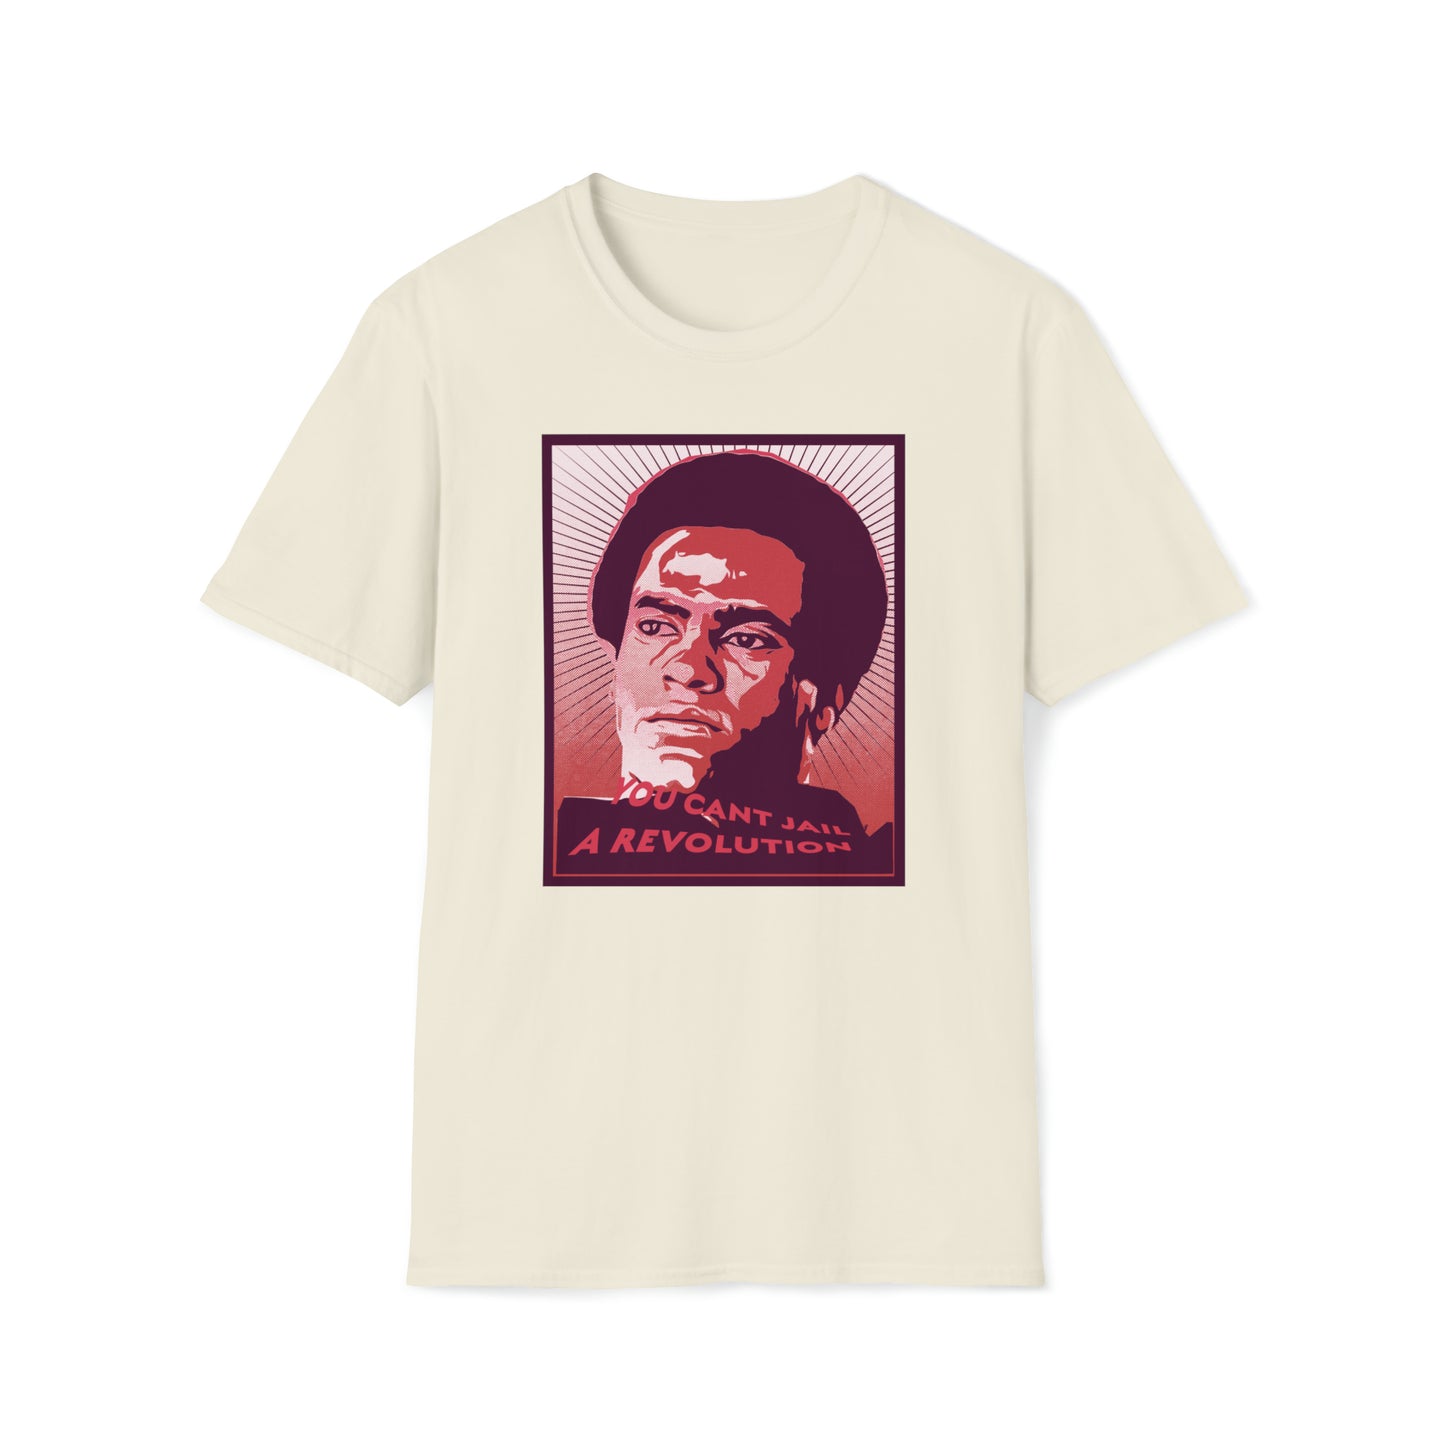 Black Panther Party Huey P Newton T-shirt ,  Power to the People Unisex Softstyle T-Shirt,  Black Culture Black History T-shirt